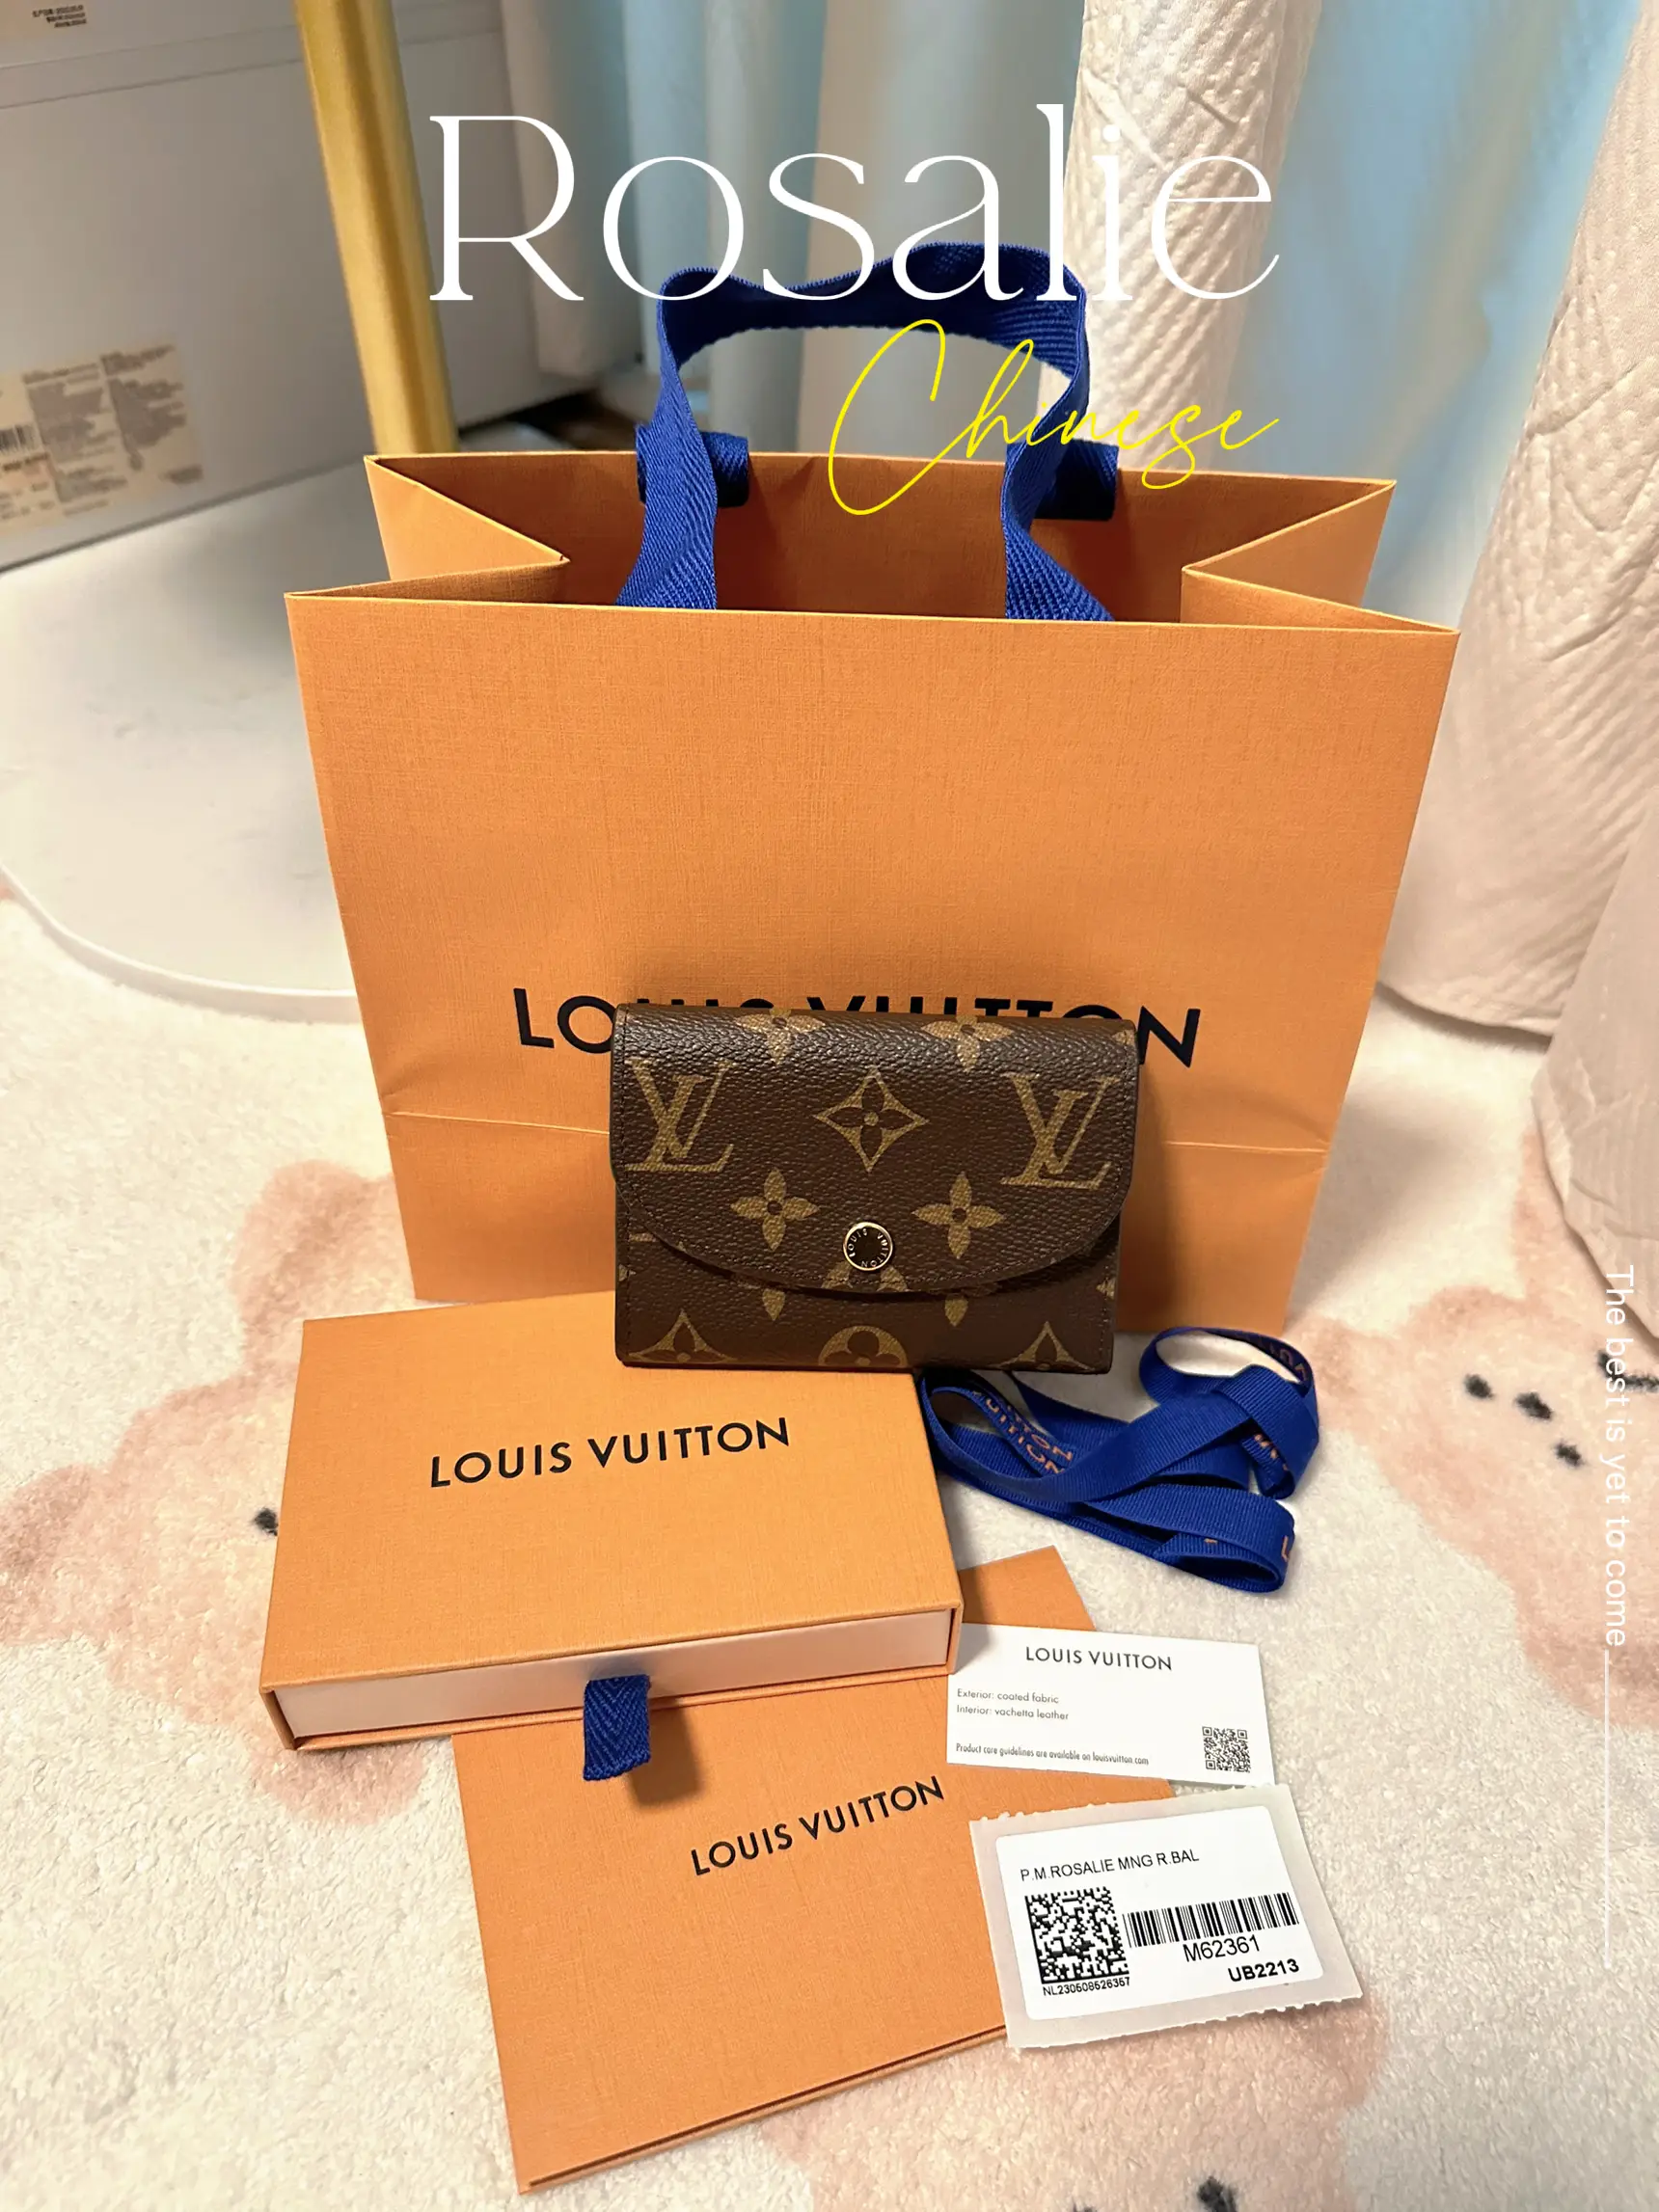 Louis Vuitton Monceau Bag Review, Gallery posted by Lexie